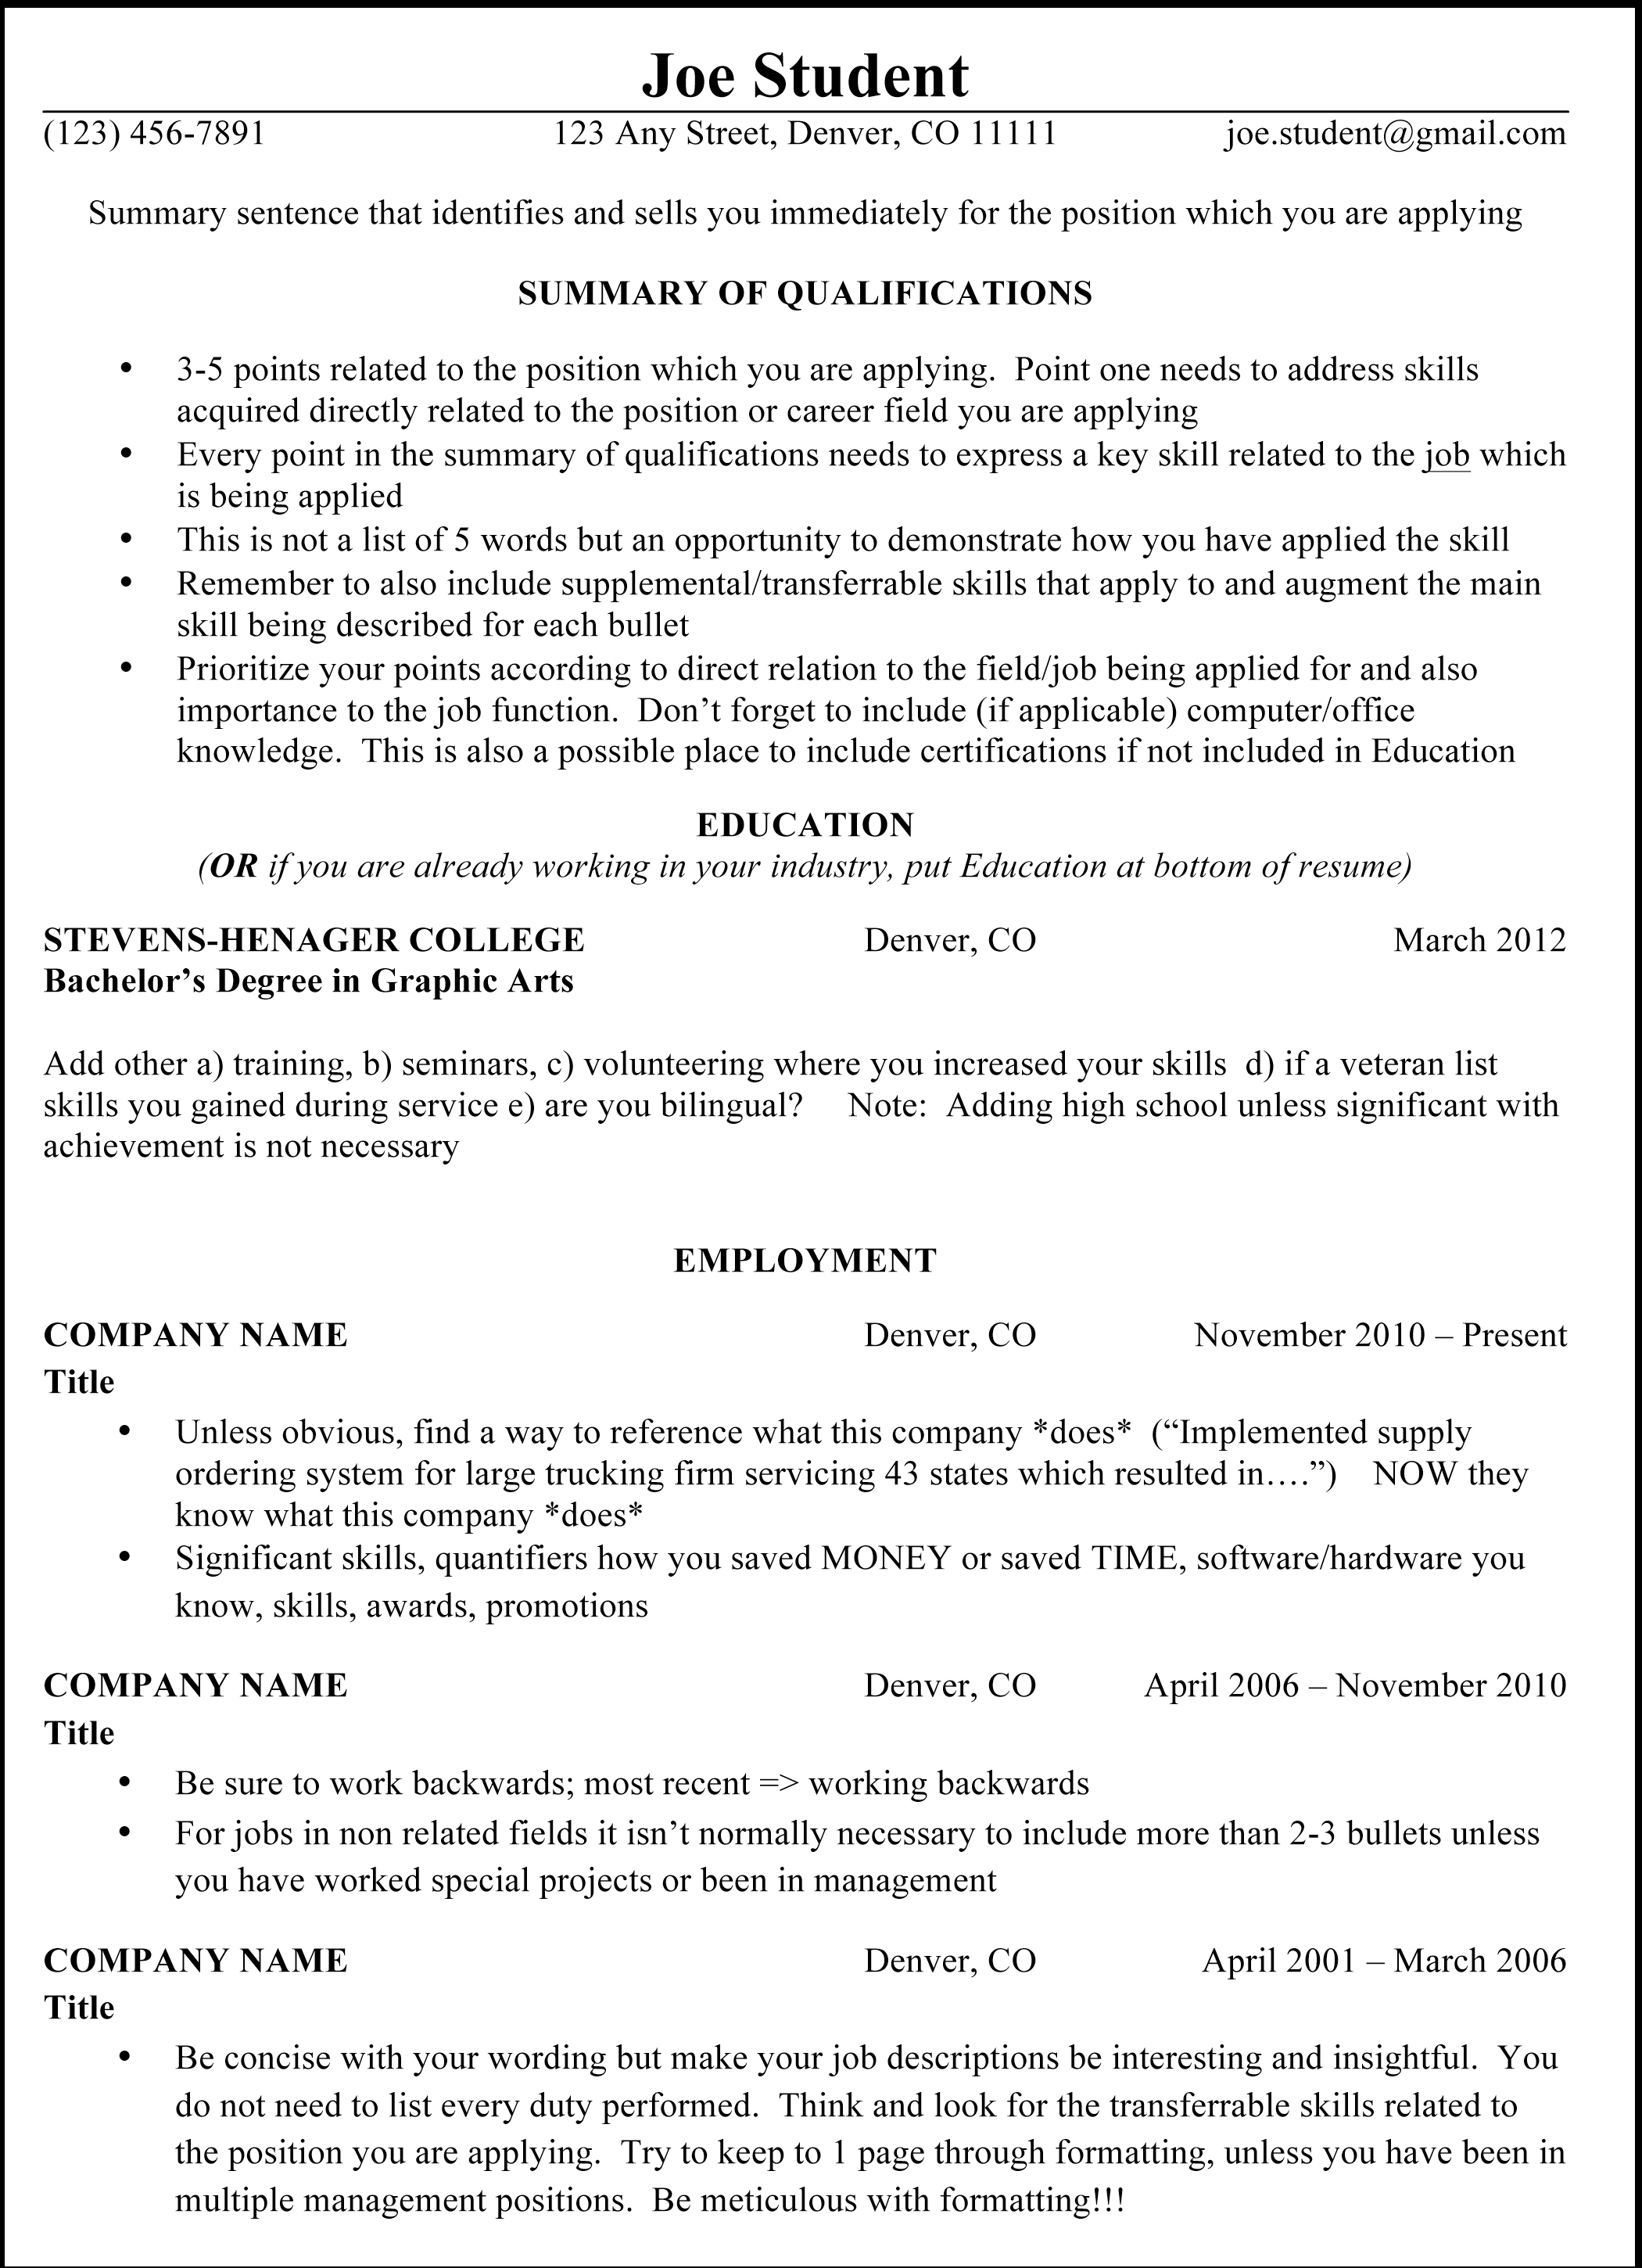 resume template science job examples of research skills science